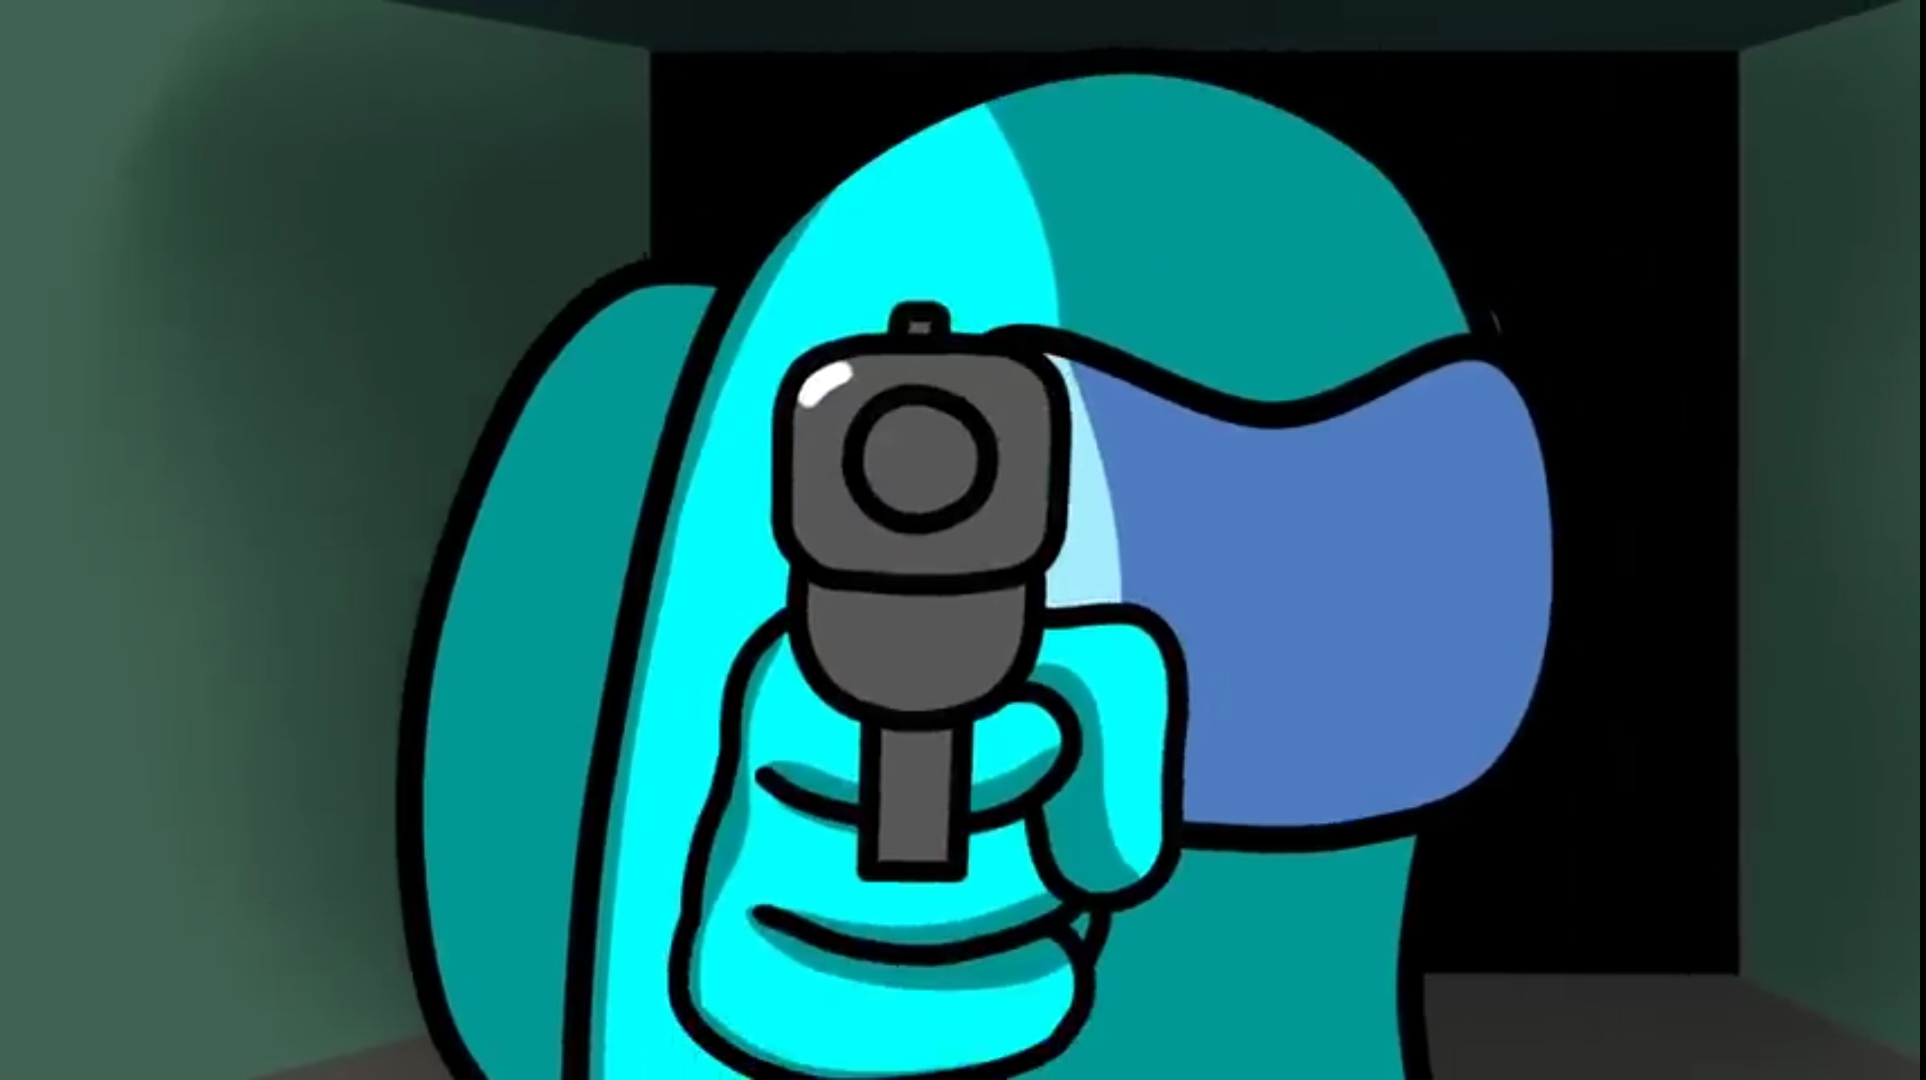 I saw you vent pointing gun Blank Meme Template